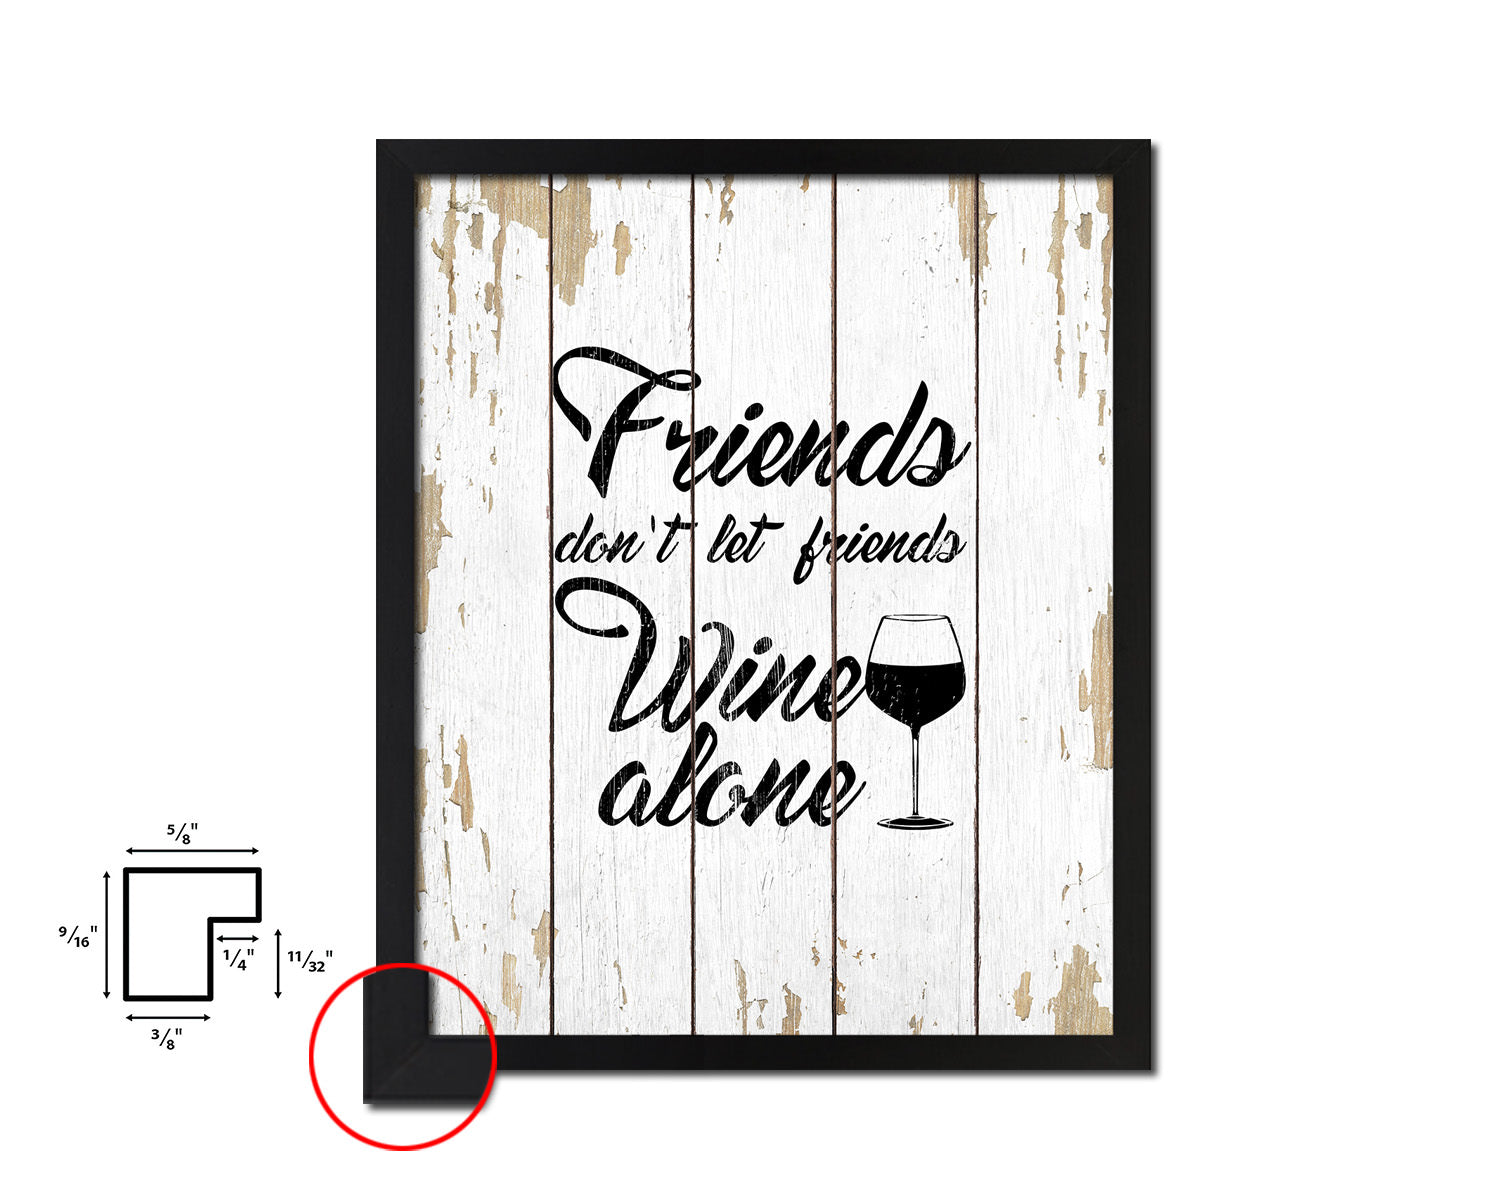 Friends don't let friends Quote Wood Framed Print Wall Decor Art Gifts